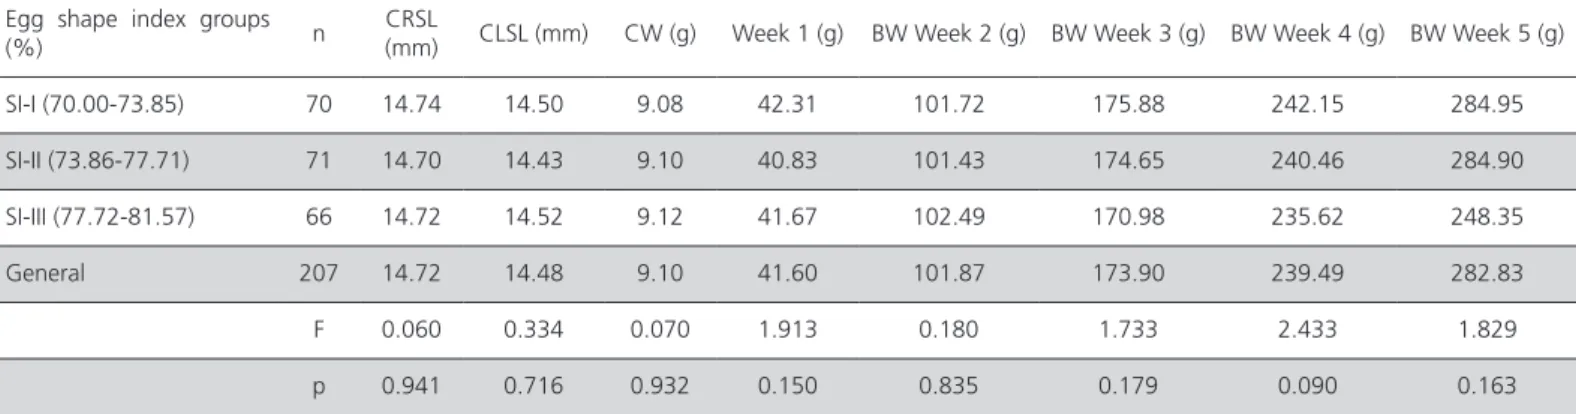 Table 5 – Effects of egg shape index on body weight during weeks 1-5. 